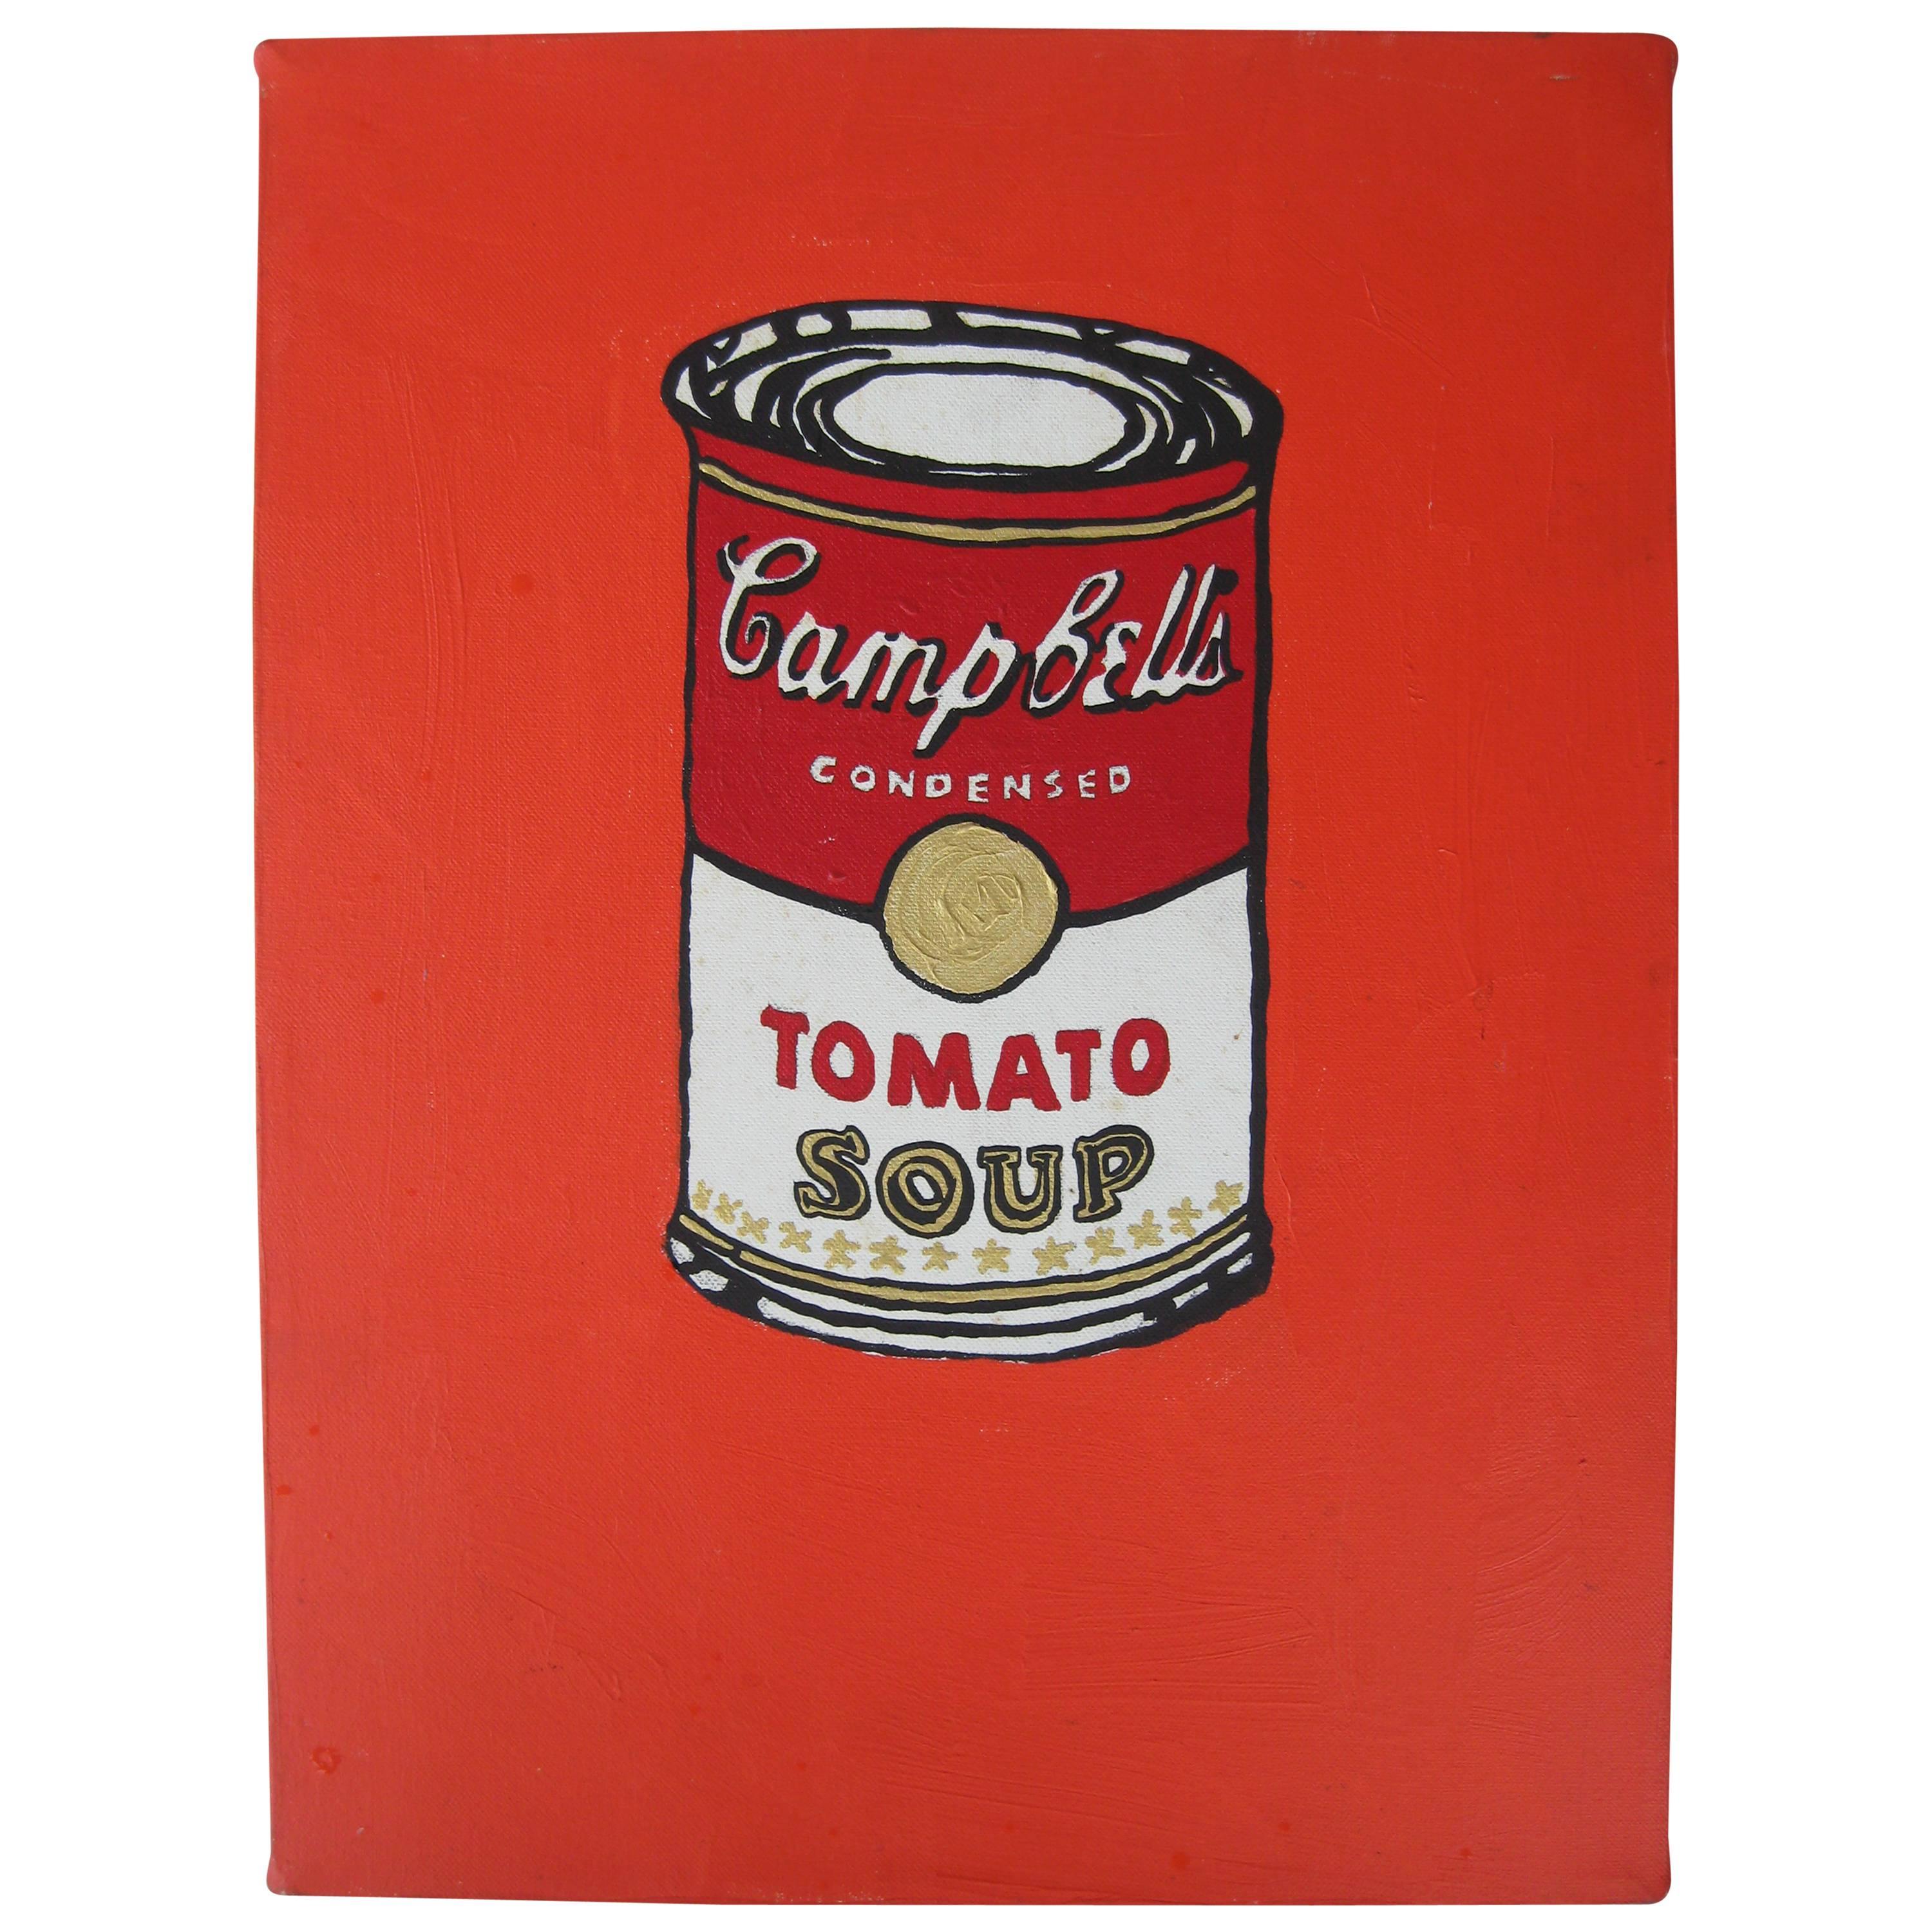 Ed Higgins Pop Art Campbell's Tomato Soup Can Painting